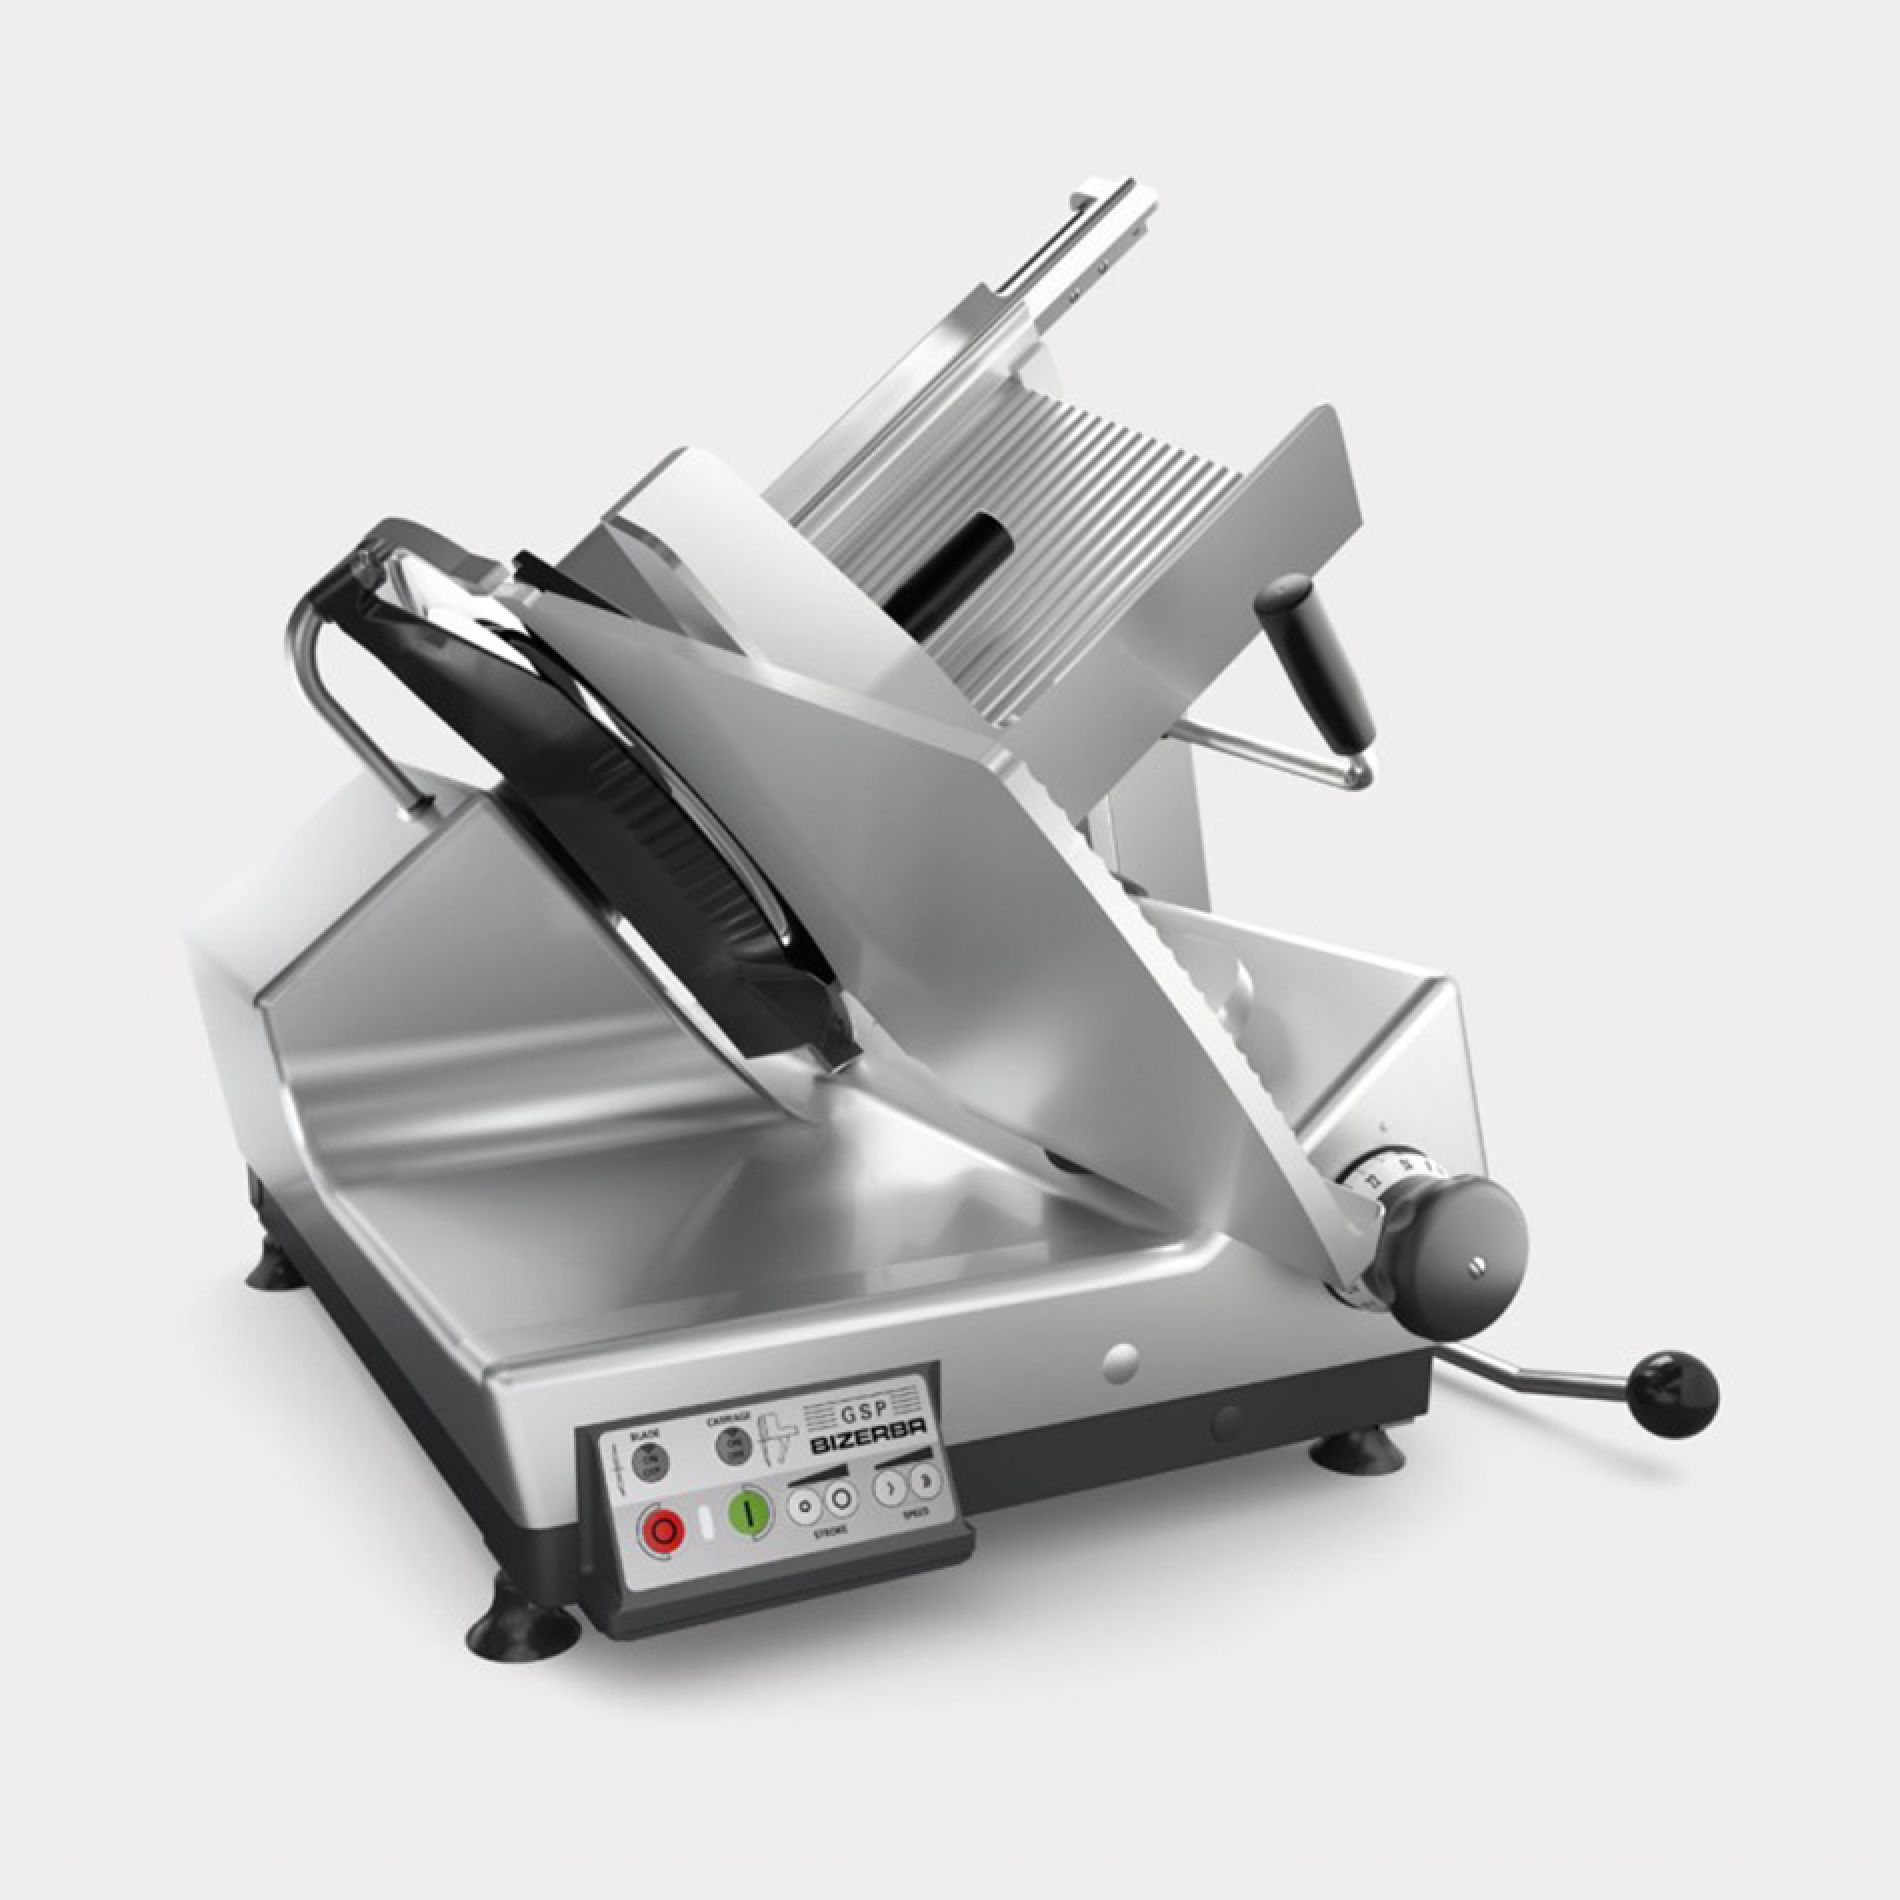 Automatic Gravity Feed Slicers